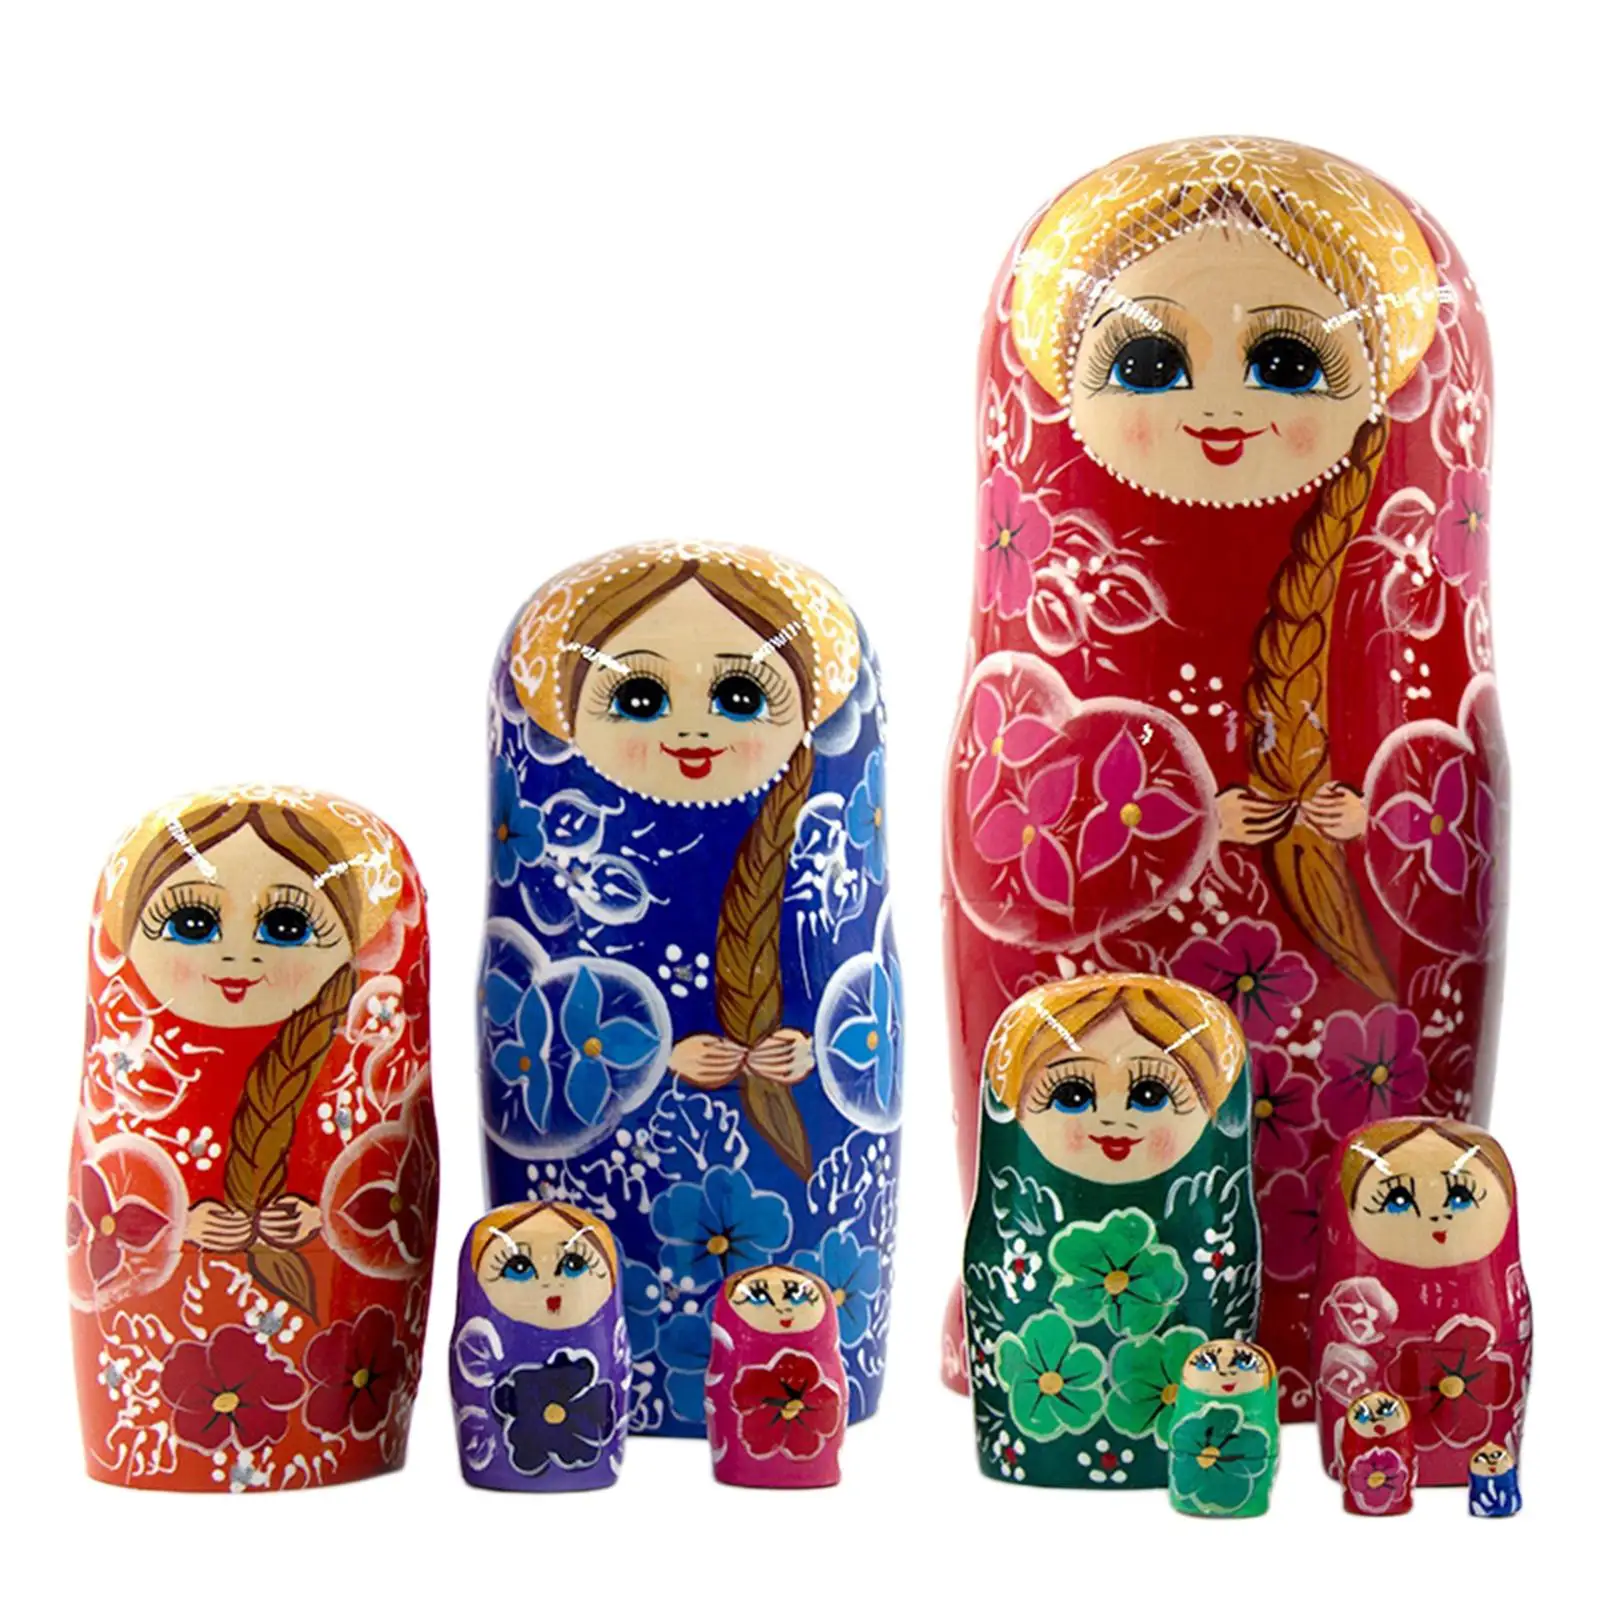 10 Pieces Novelty Nesting Dolls Toy Educational Toy Ornaments Matryoshka for Tabletop Shop Window Party Living Room Girls Boys